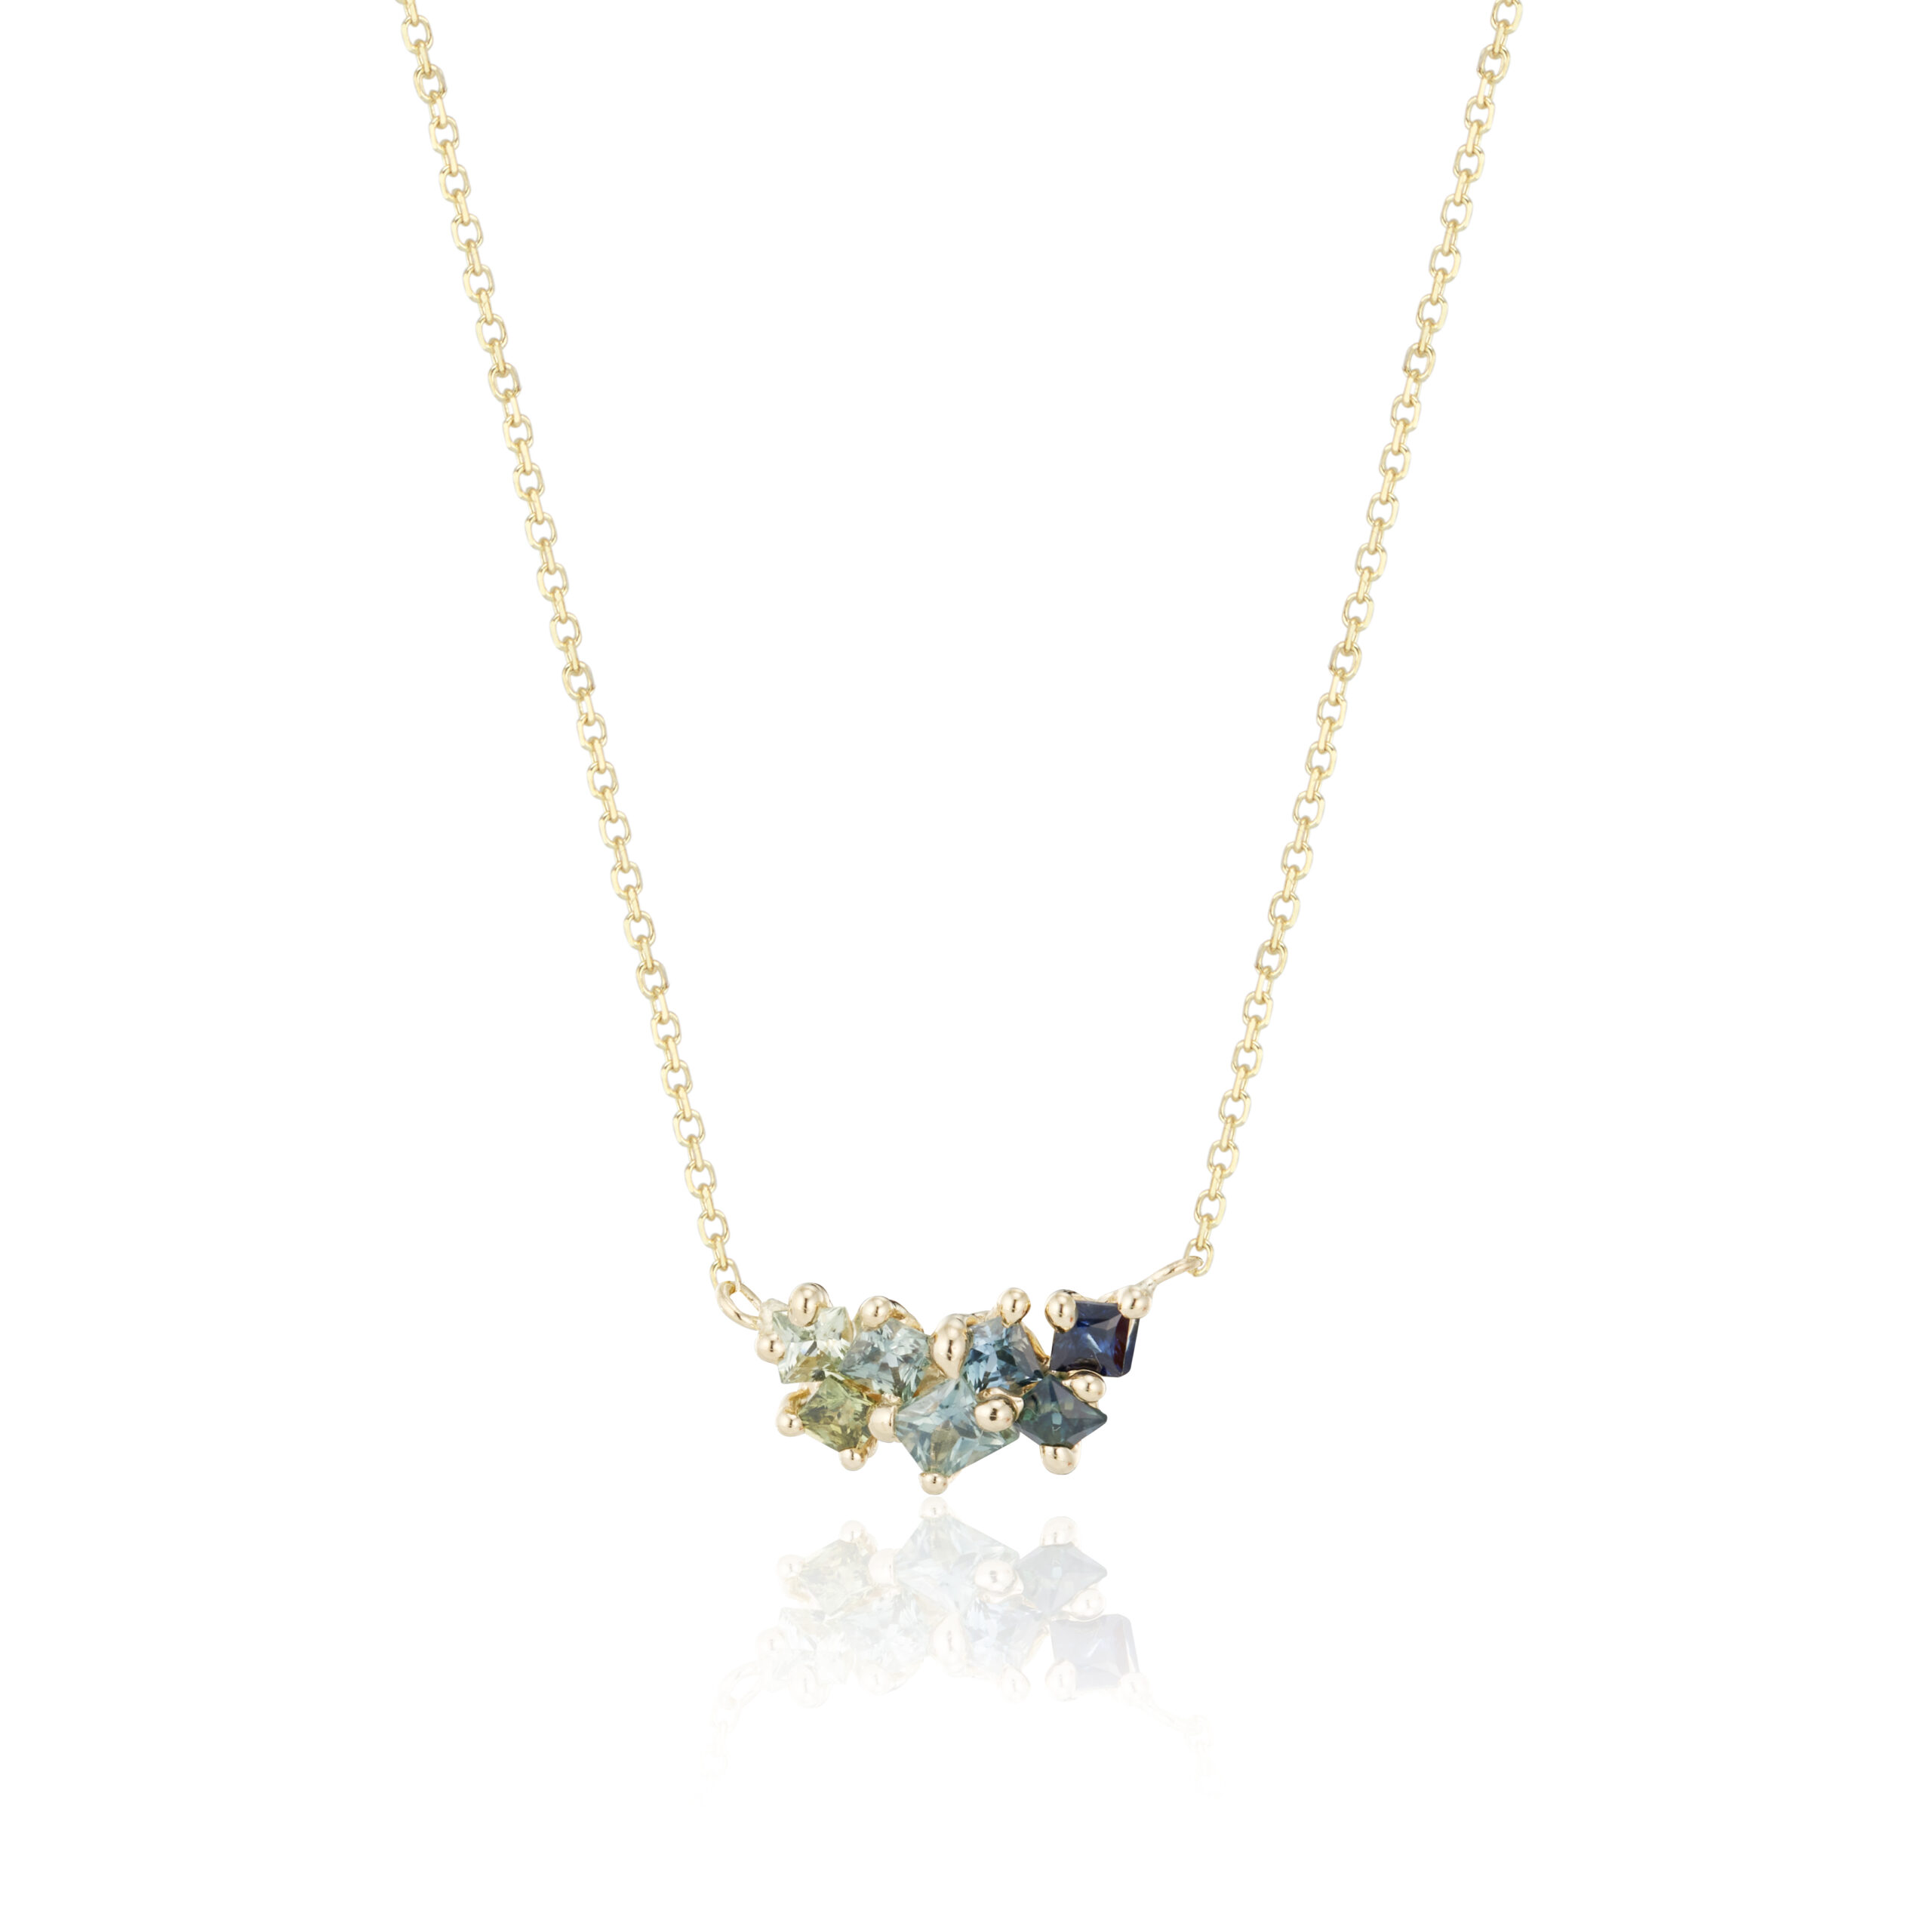 Bonnie Blues Color-Phase Necklace, Cast Not Set, in Yellow Gold.